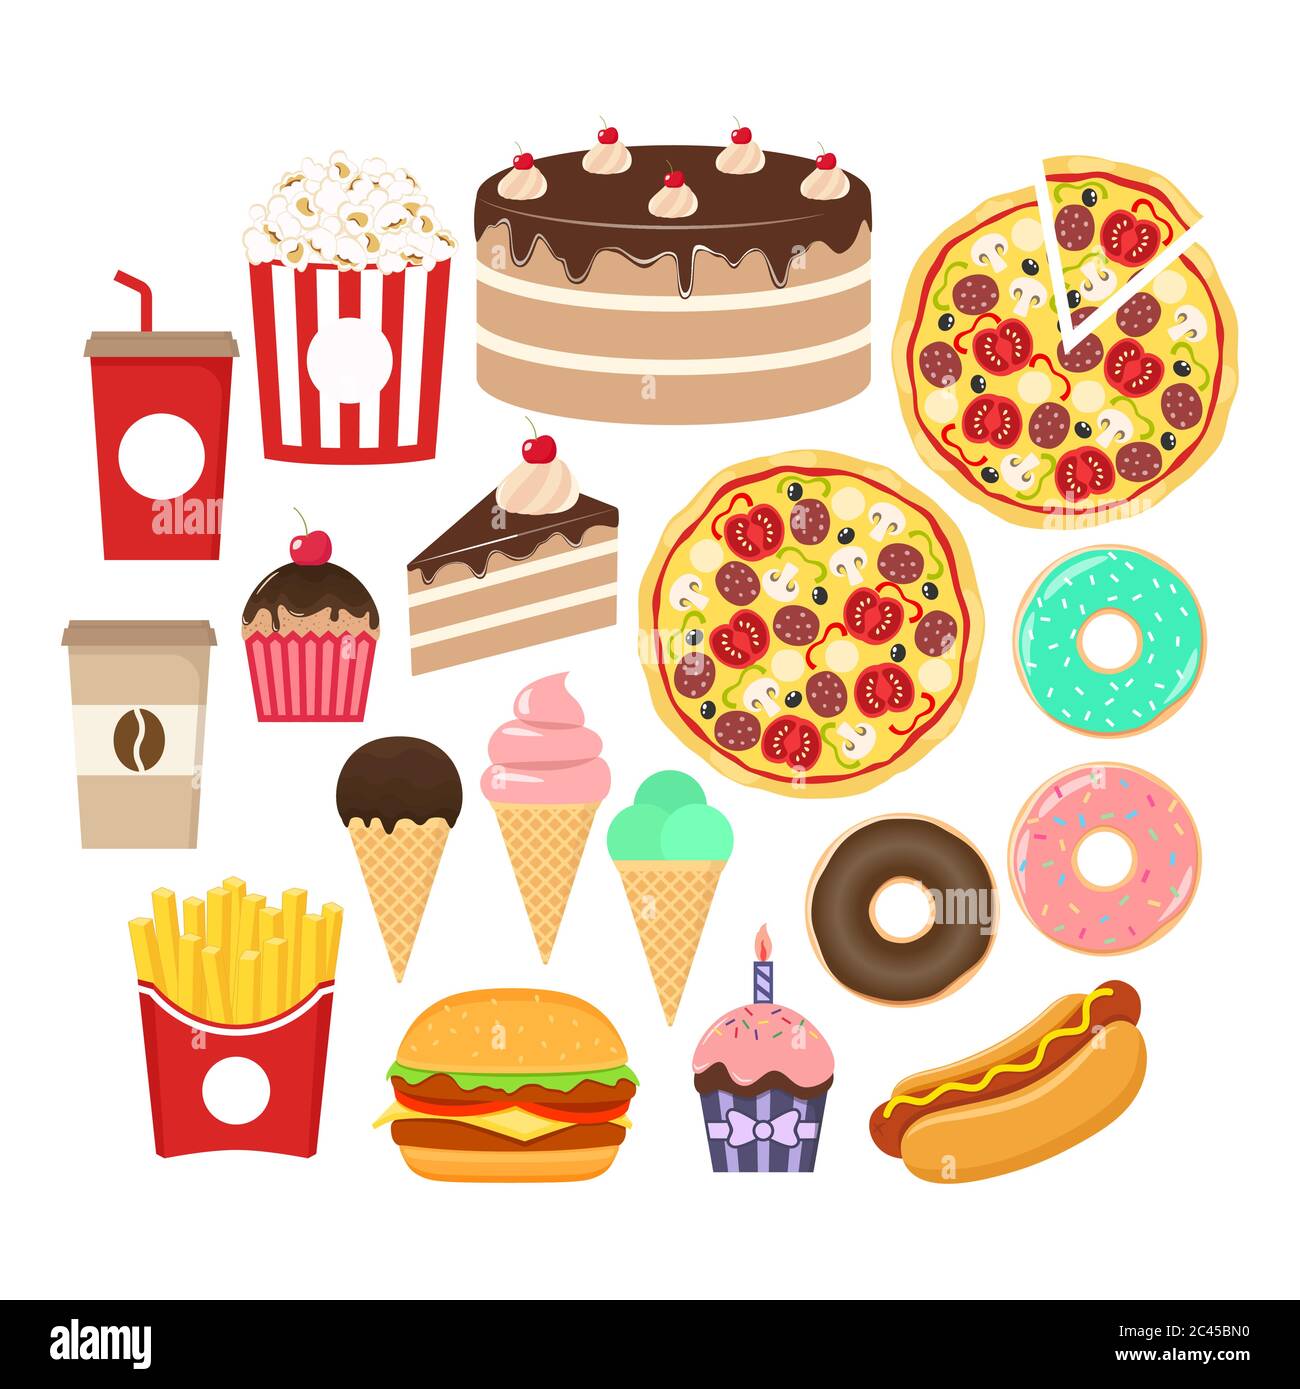 Fast food icons set. Burger, popcorn, french fries, soda, donut and hot dog colorful cartoon set. Chocolate glazed cake, ice cream, coffee cup and cup Stock Vector